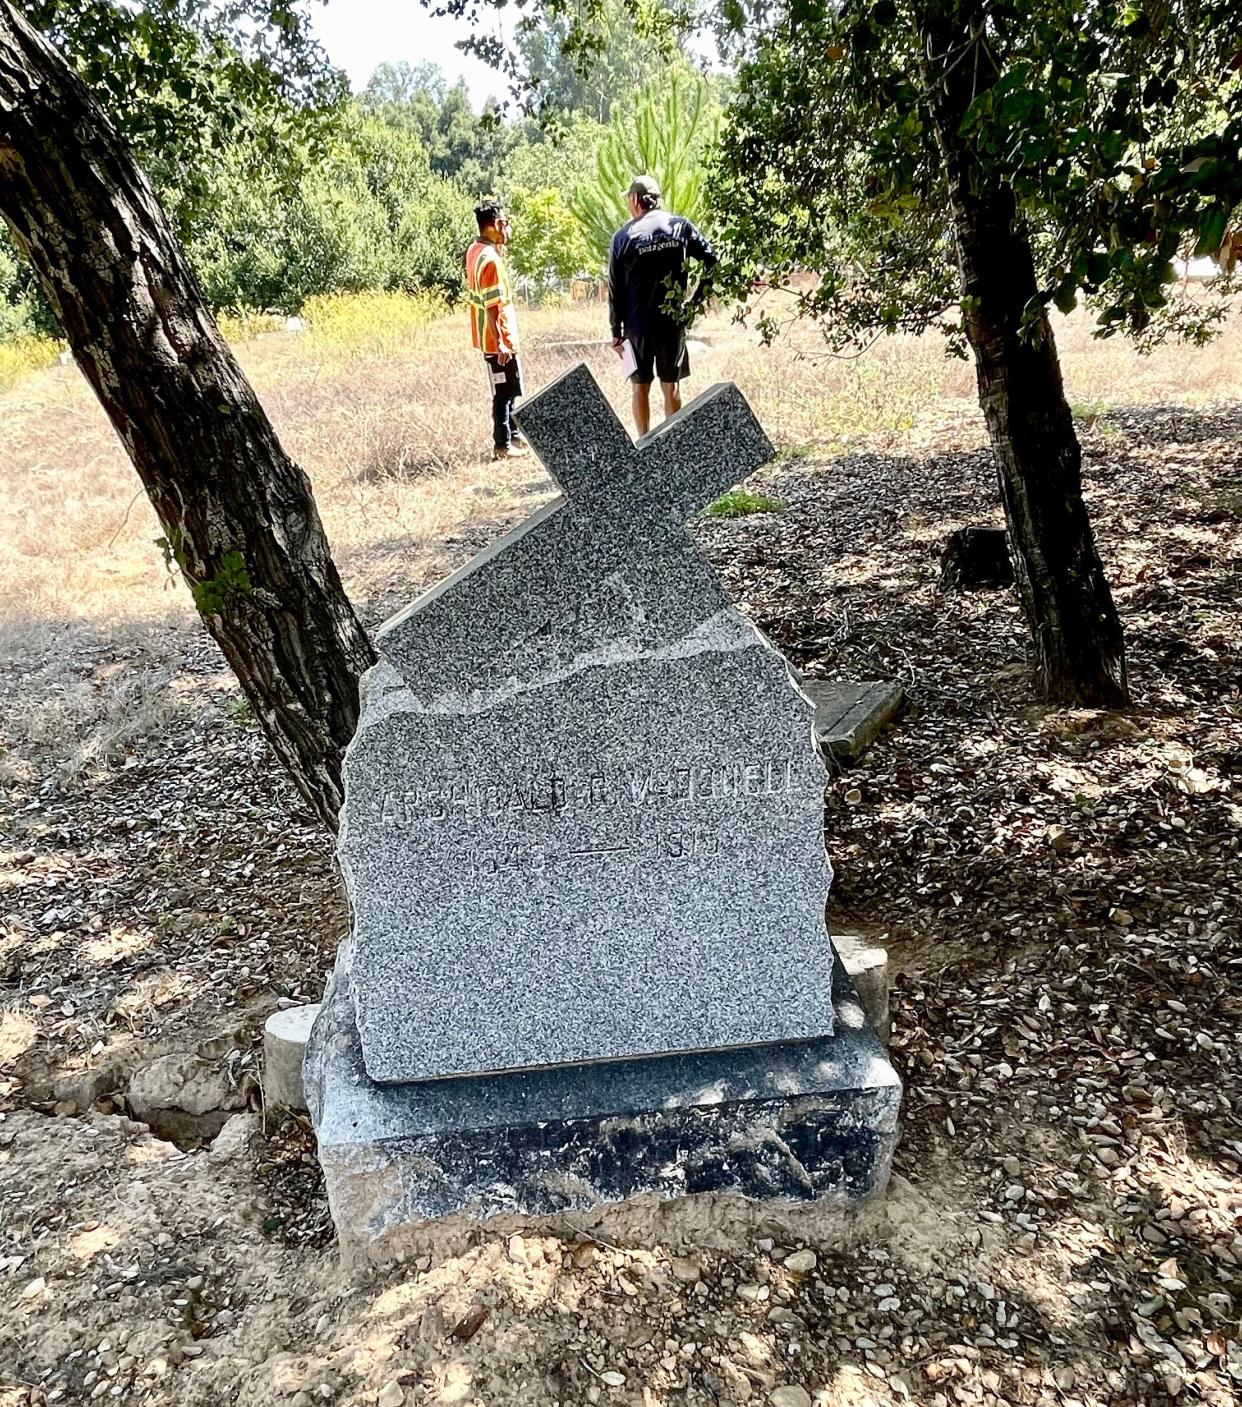 Michael Chapman, right, talks to a construction worker at St. Thomas Aquinas Cemetery in the Ojai Valley on Sept. 8th. A month after work on a restoration project stopped due to community concerns, workers have started sifting through soil before the project resumes.